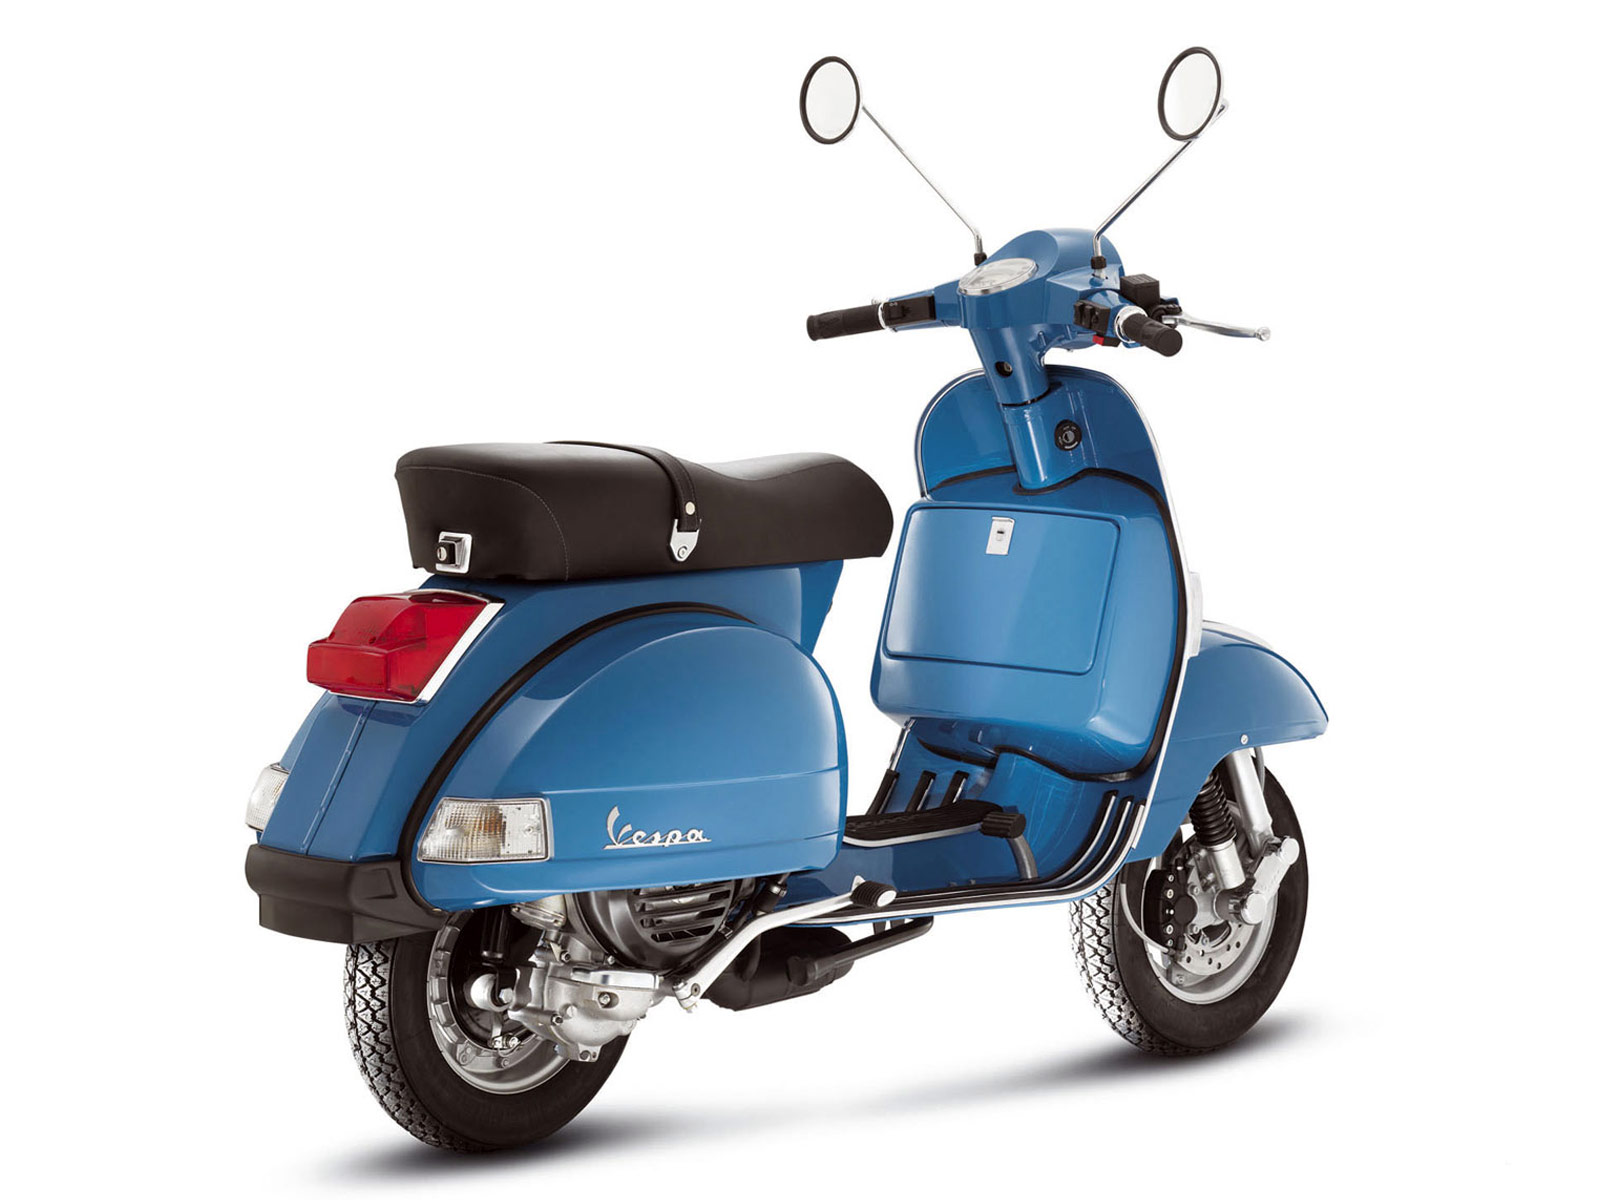  VESPA PX 150  wallpapers 2011 accident lawyers information 